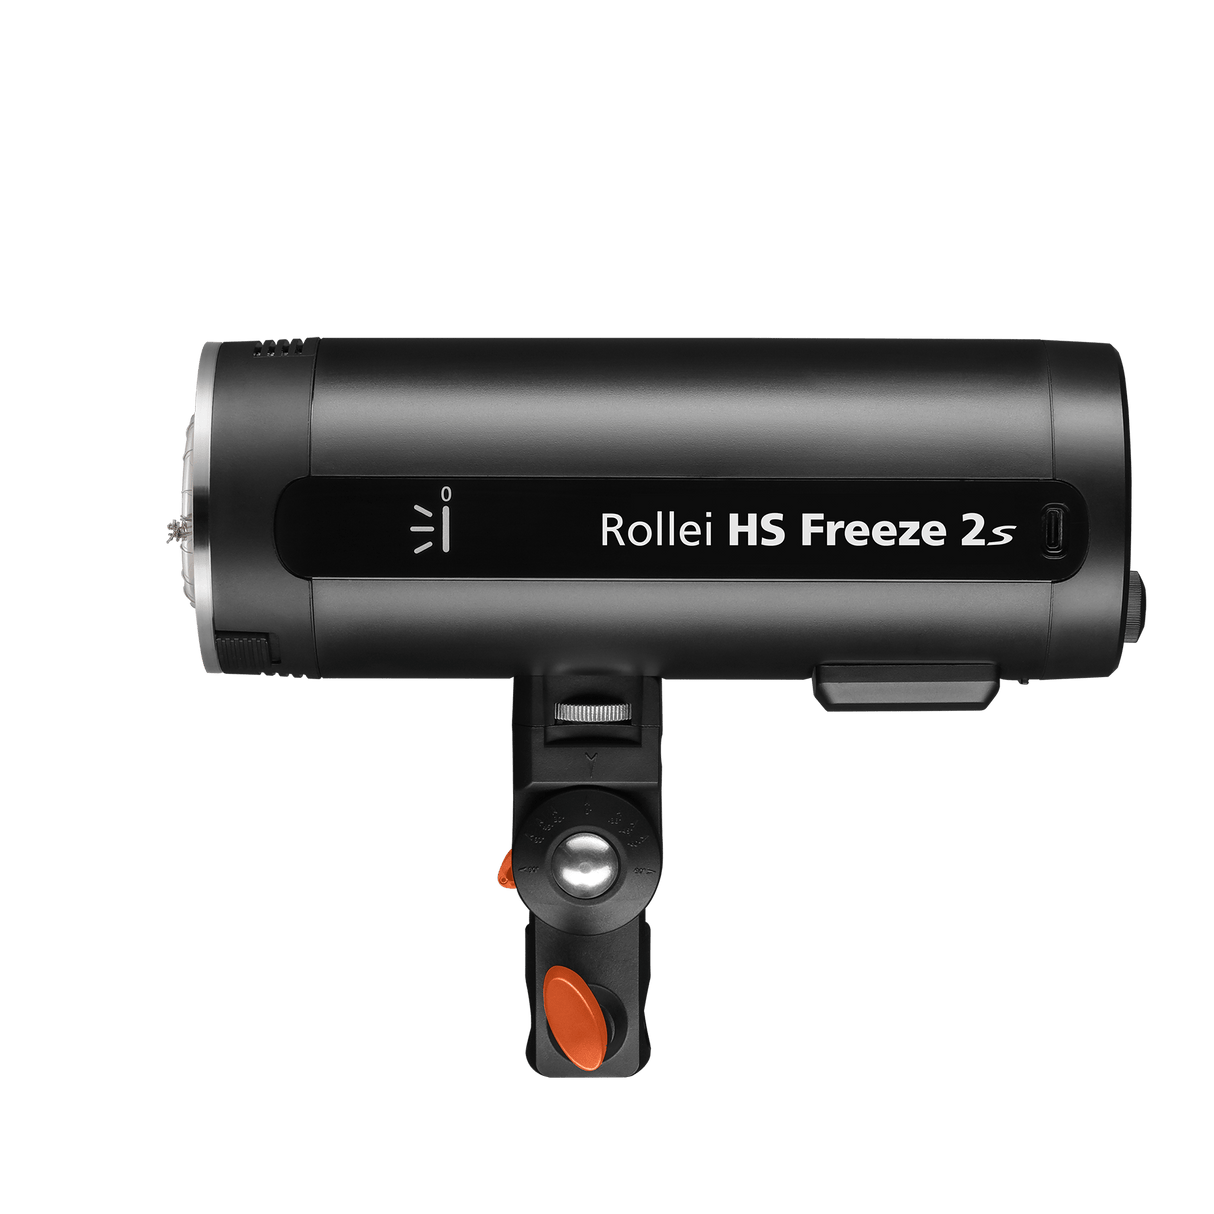 HS Freeze 2s with studio flash Rollei – - battery